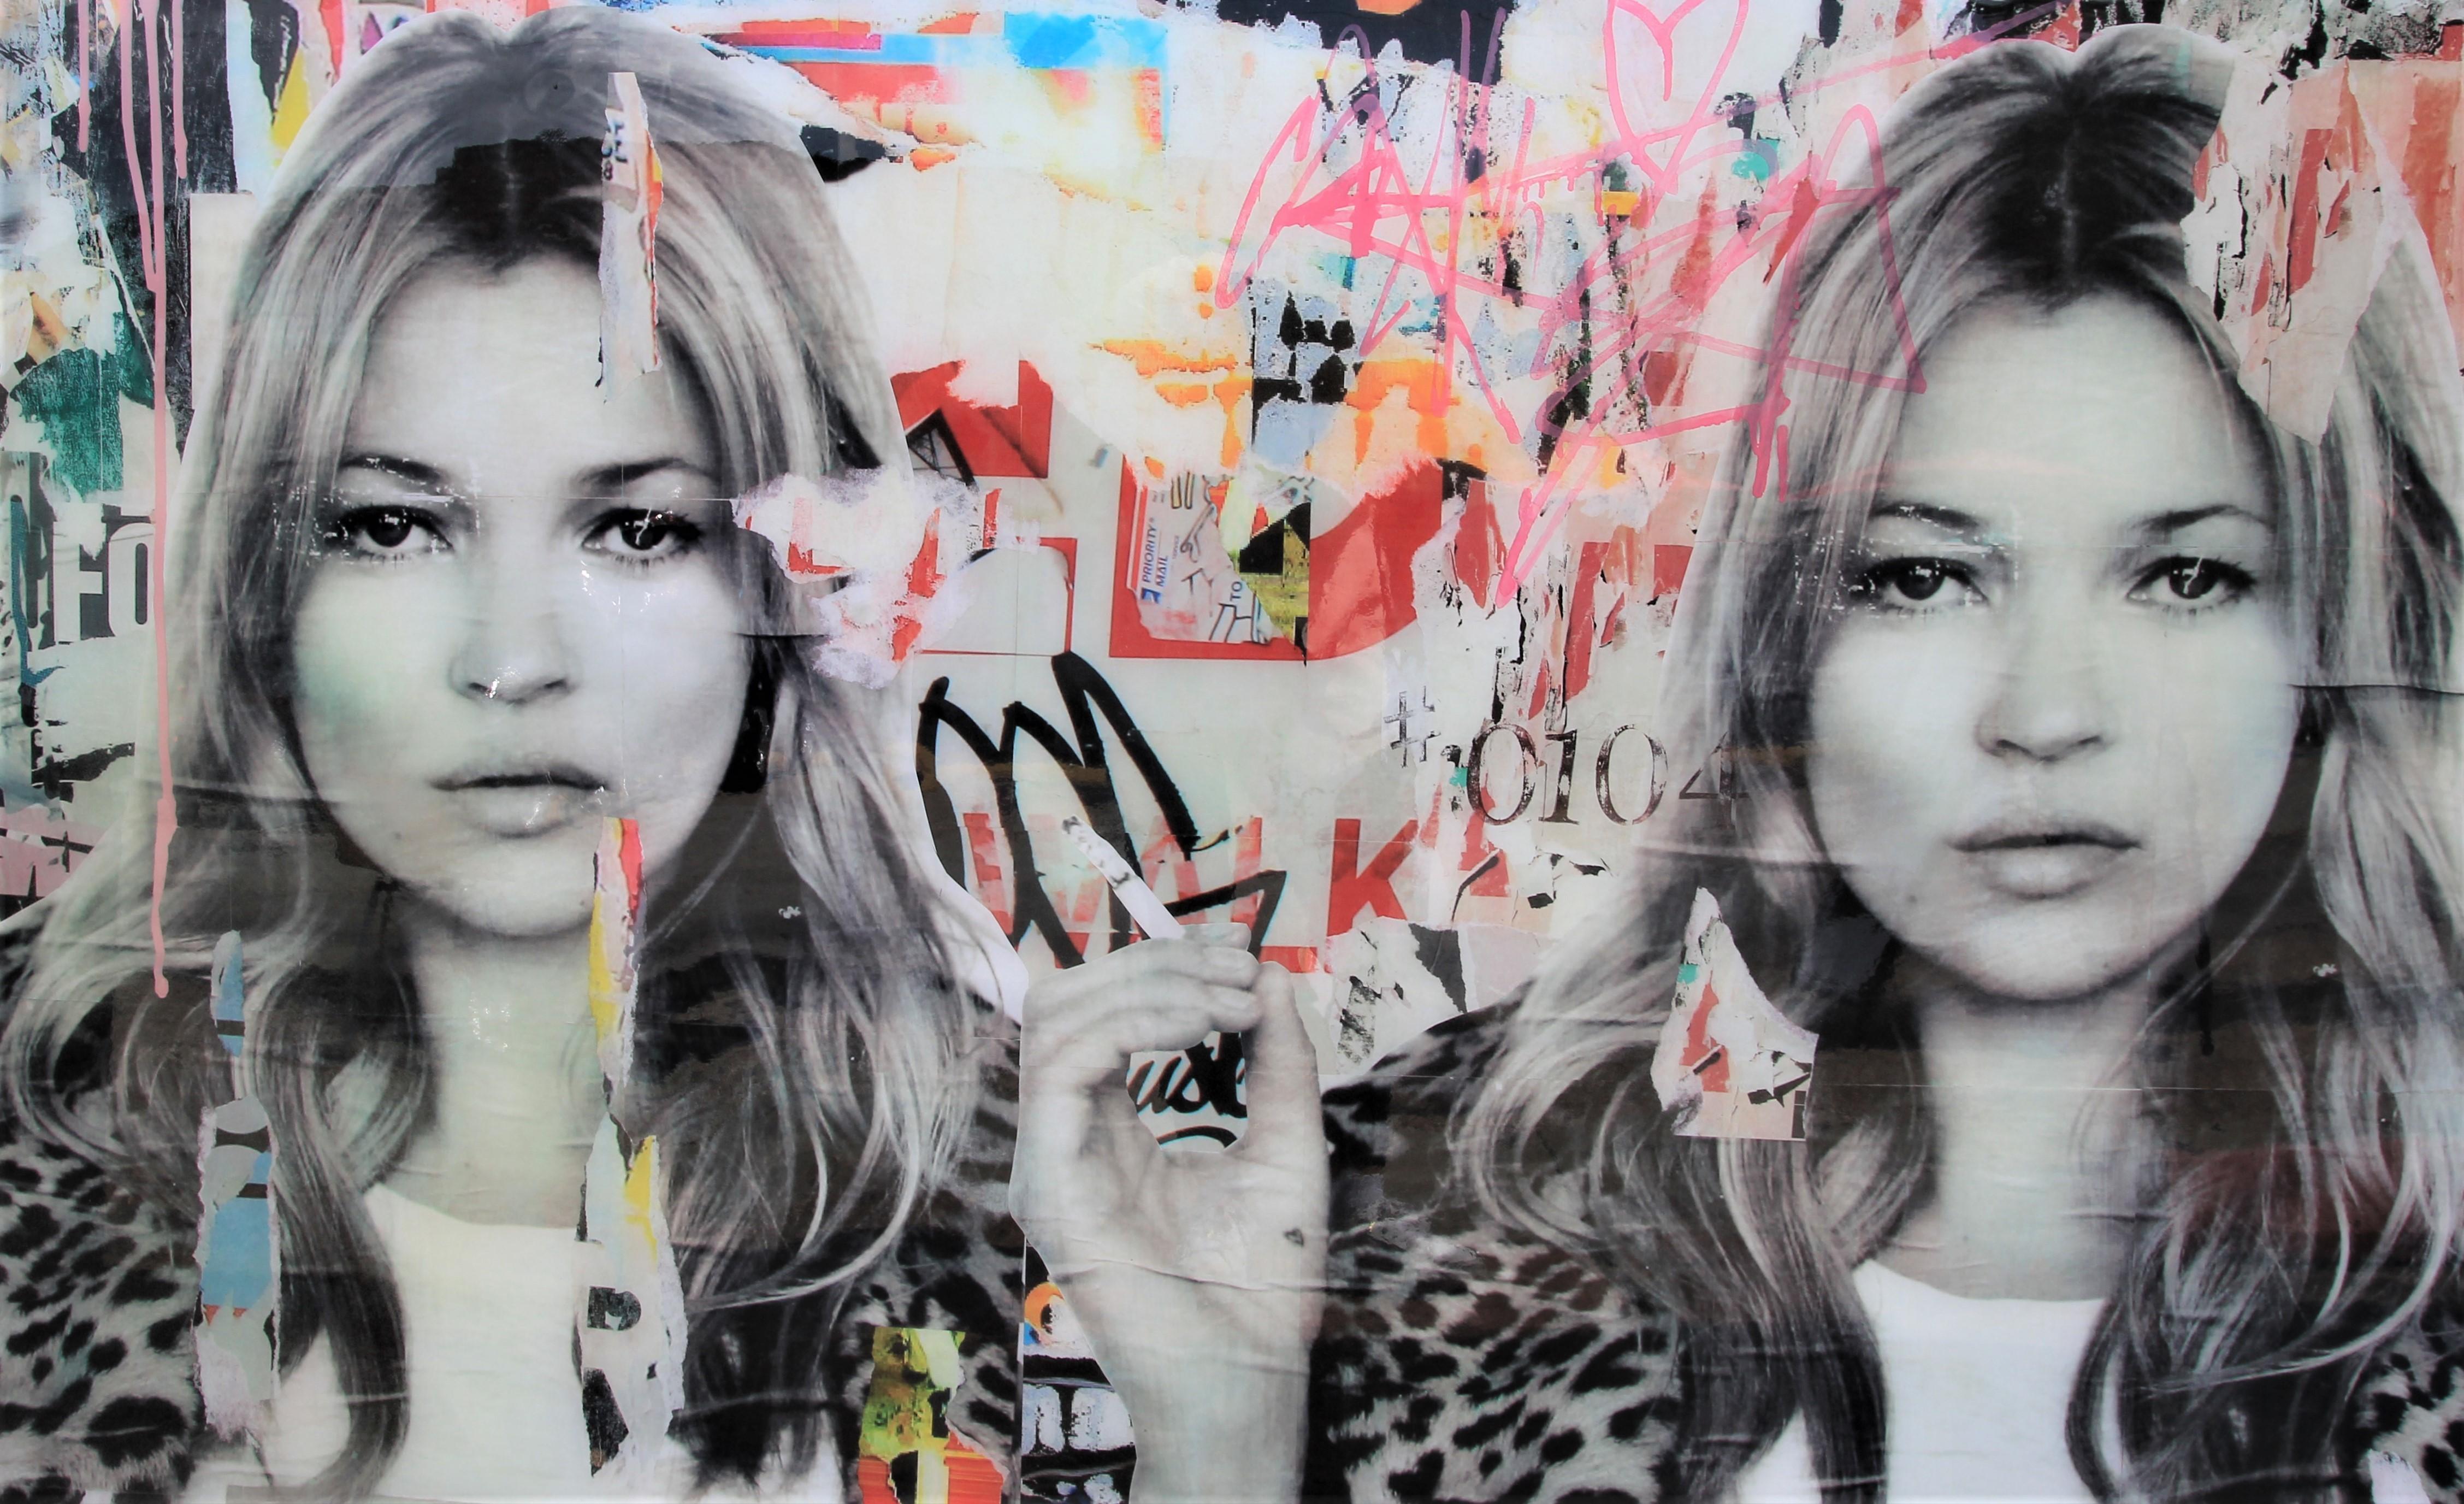 “Pair of Kates” Colorful Contemporary Mixed Media Pop Art Collage of Kate Moss - Painting by Jim Hudek